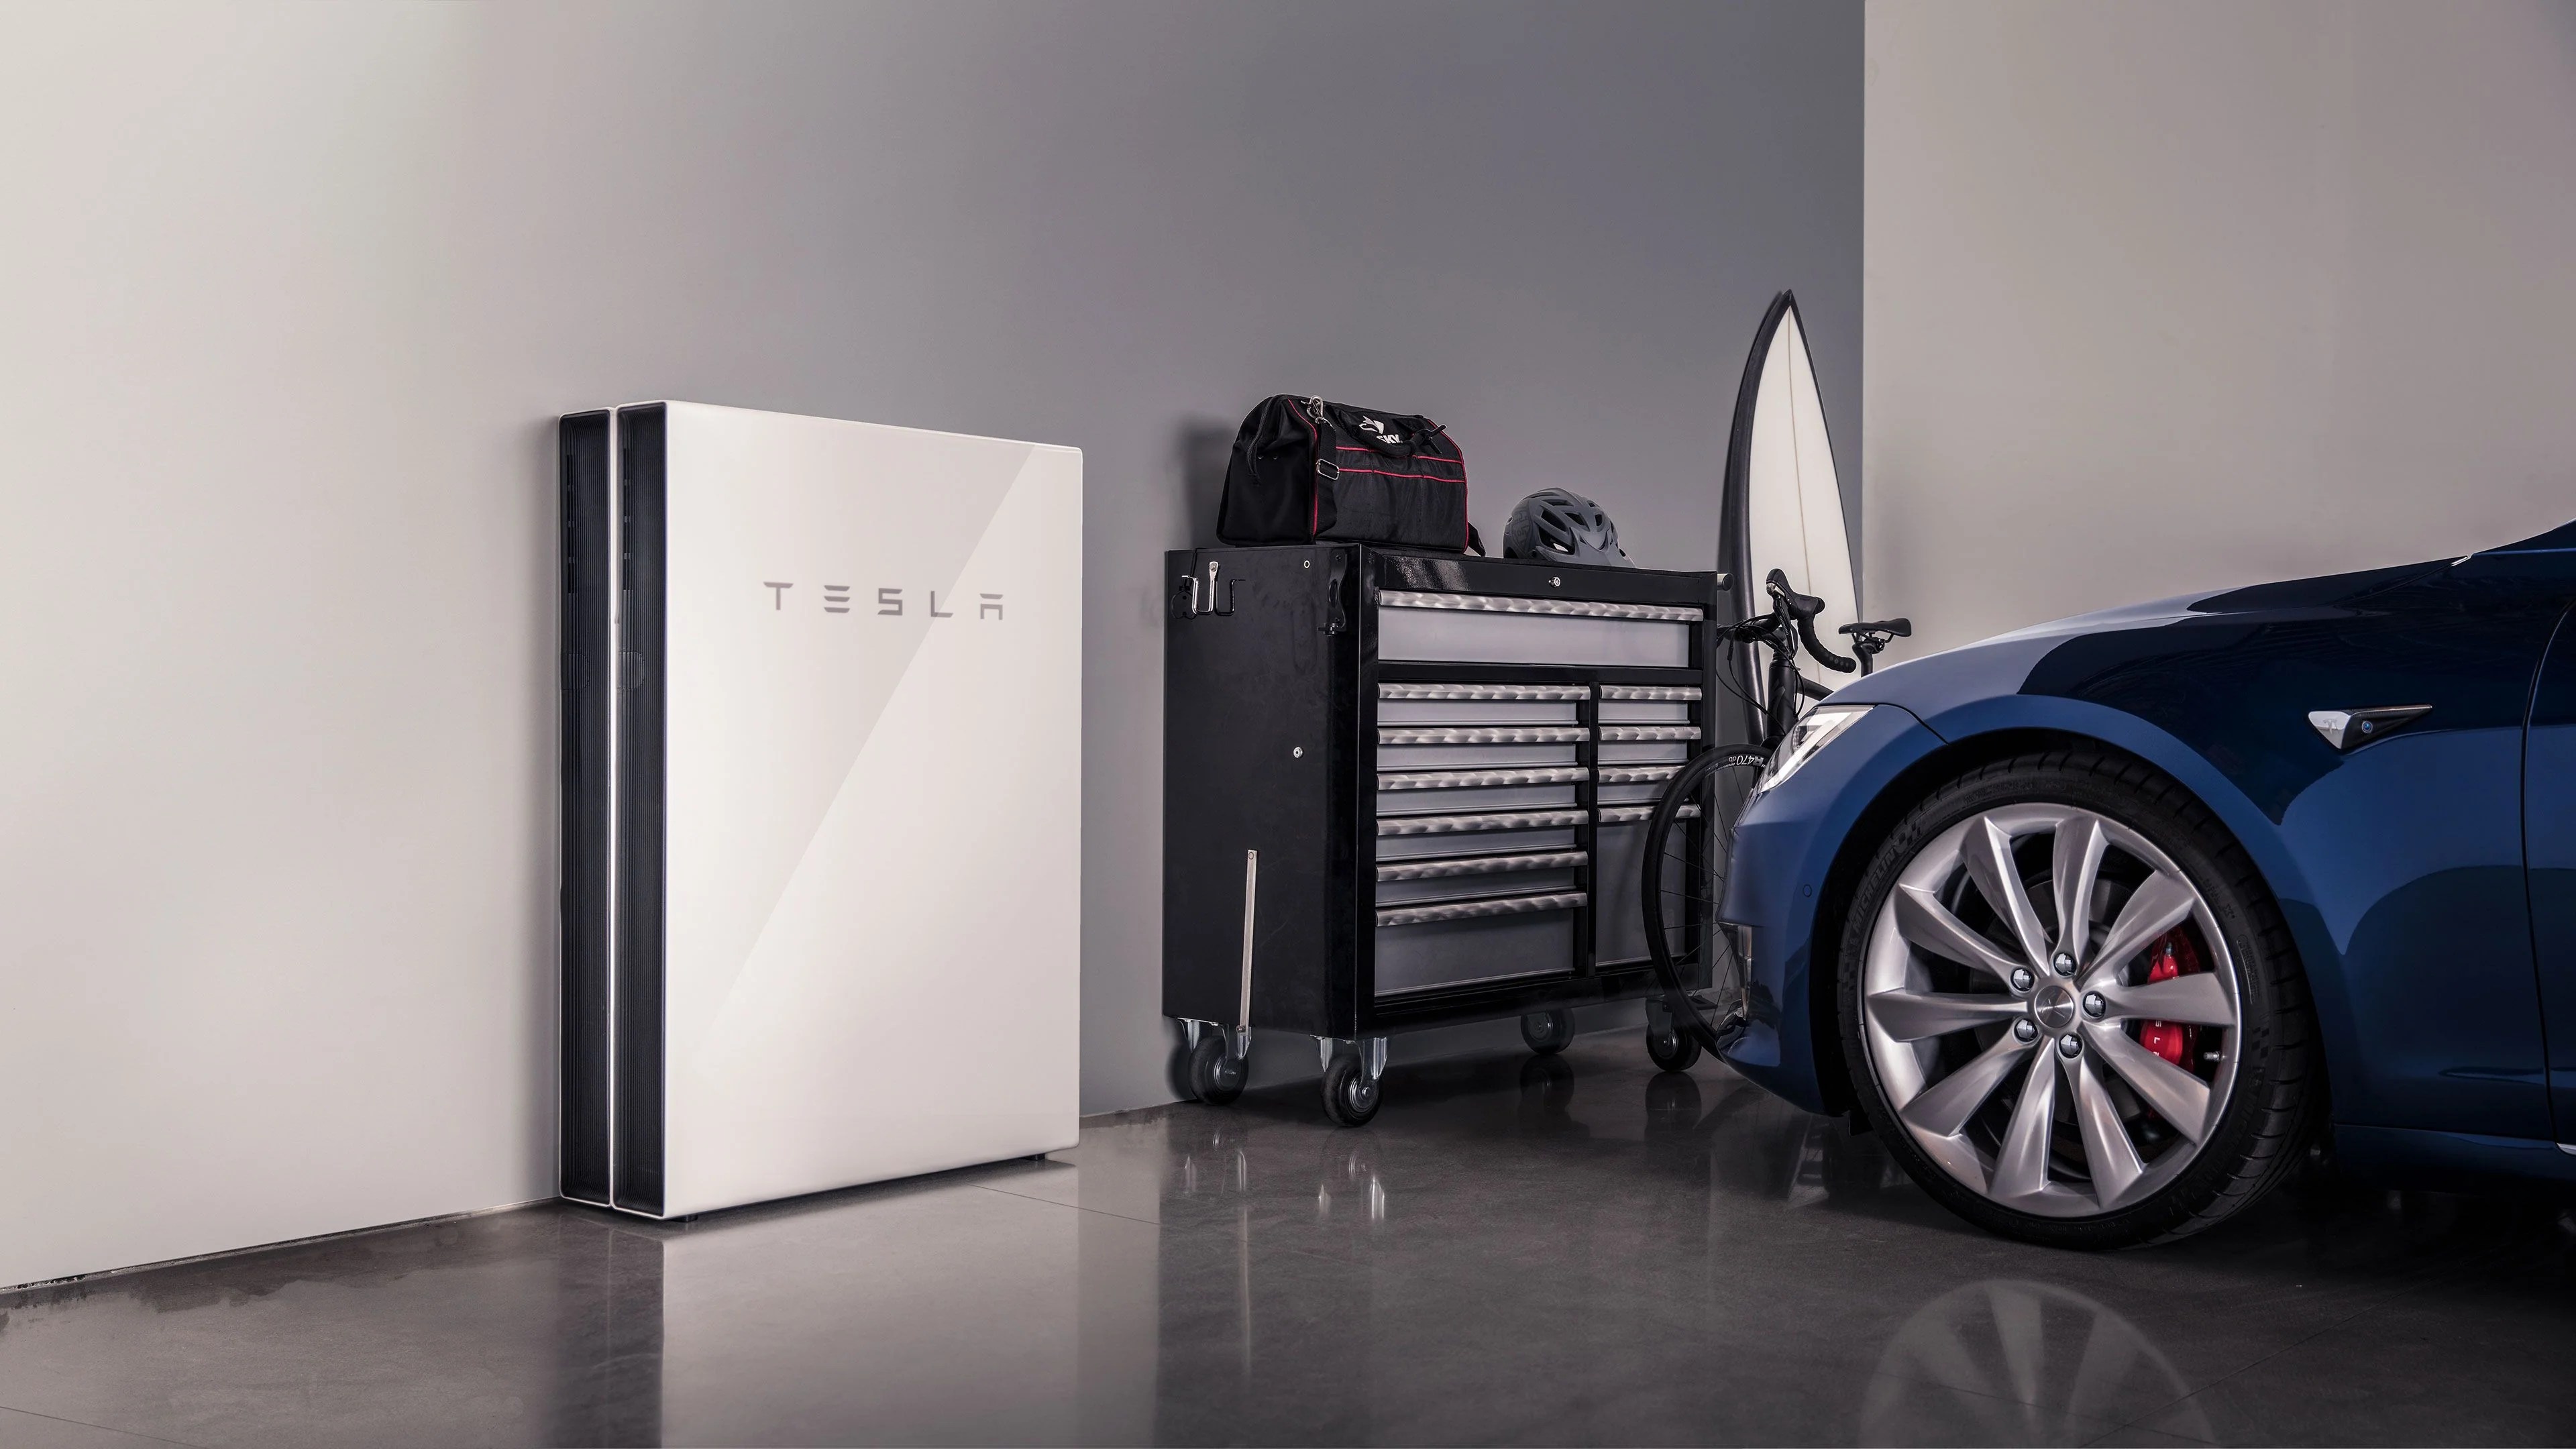 Tesla Powerwall Capacity : Tesla Dominates Carmakers In Battery Capacity Deployed Including State Backed Rivals In China Forcar Concepts